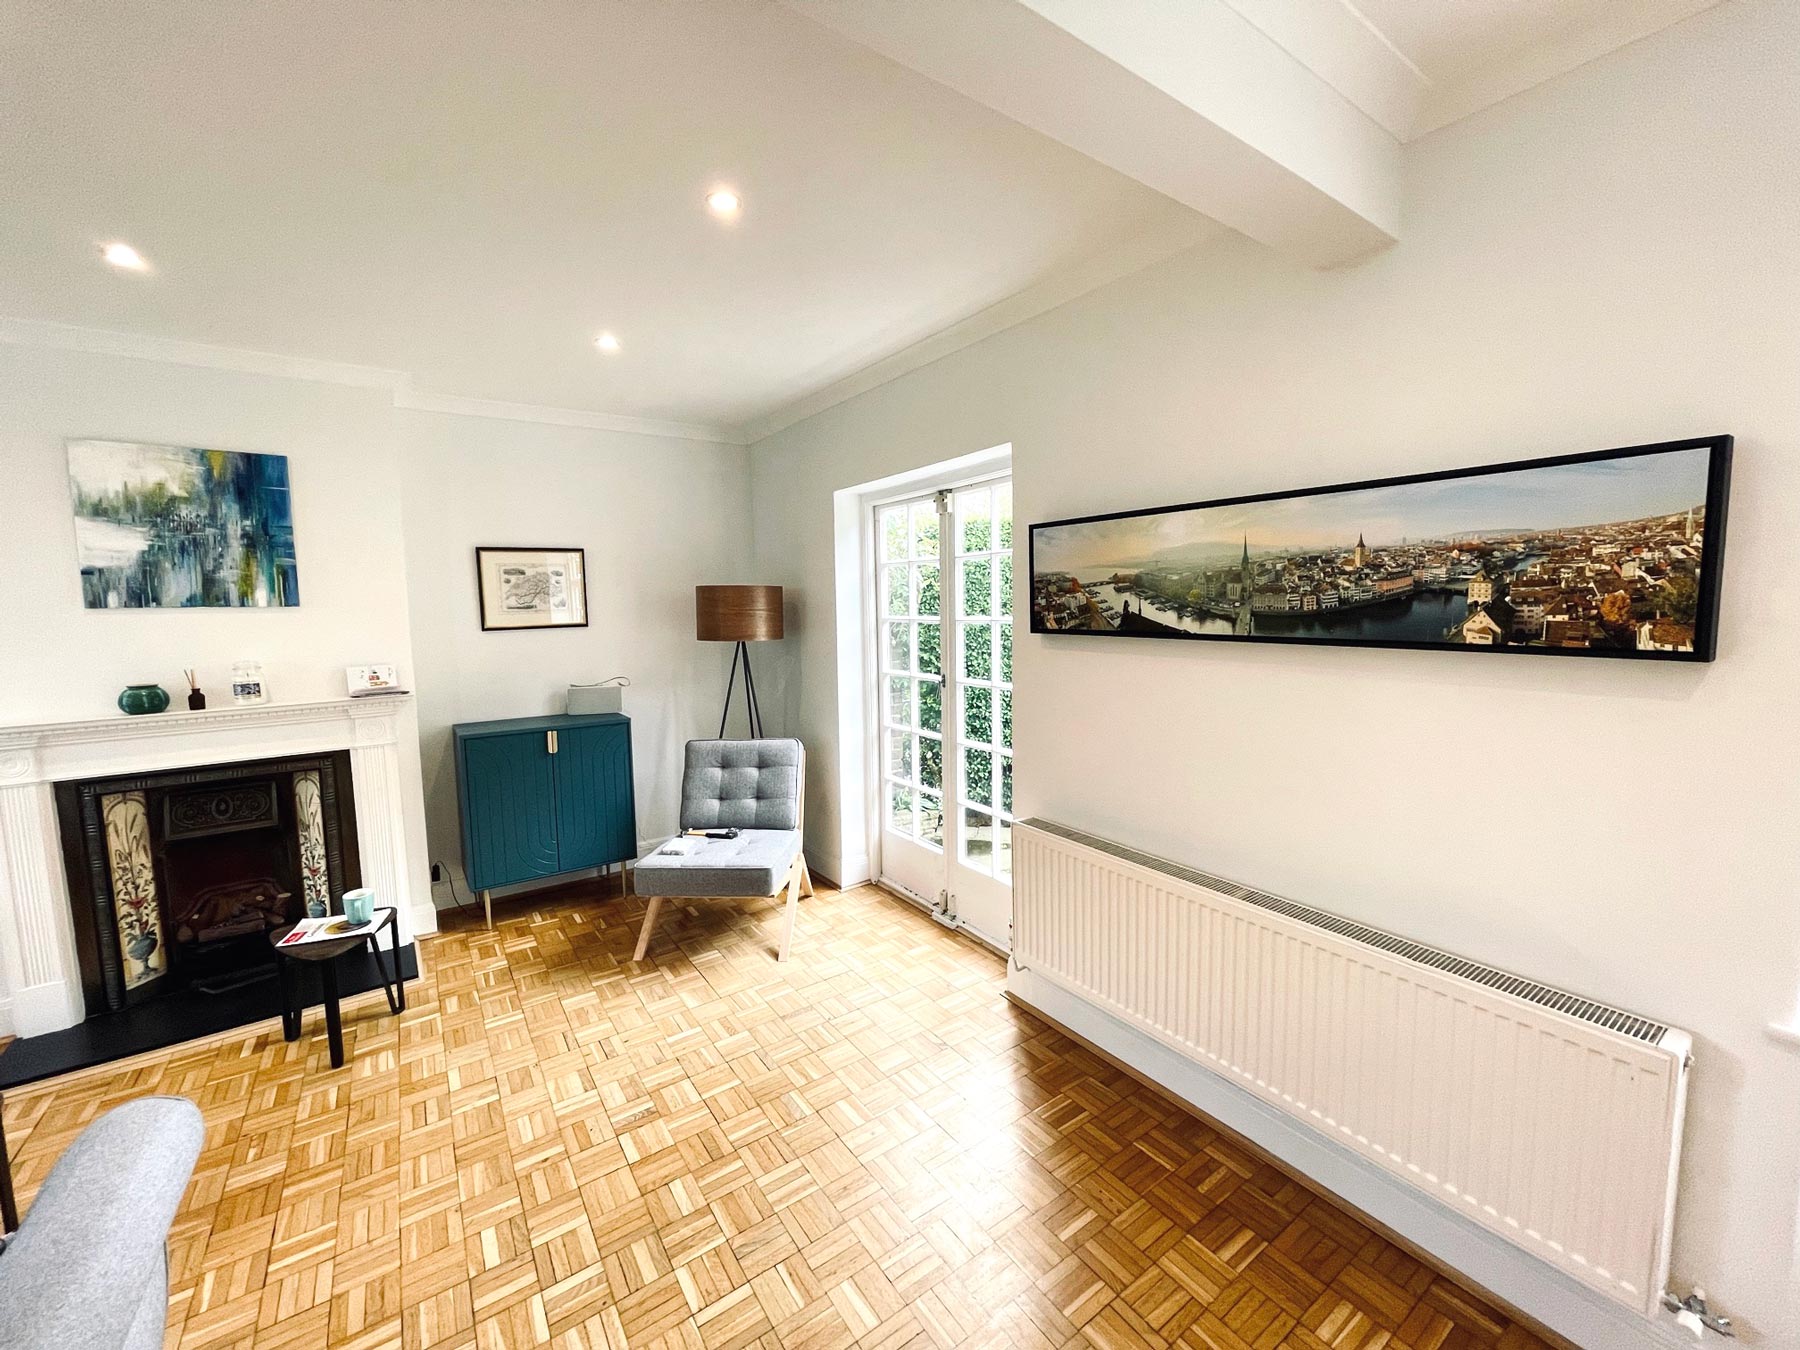 Print panoramics customers image in their home